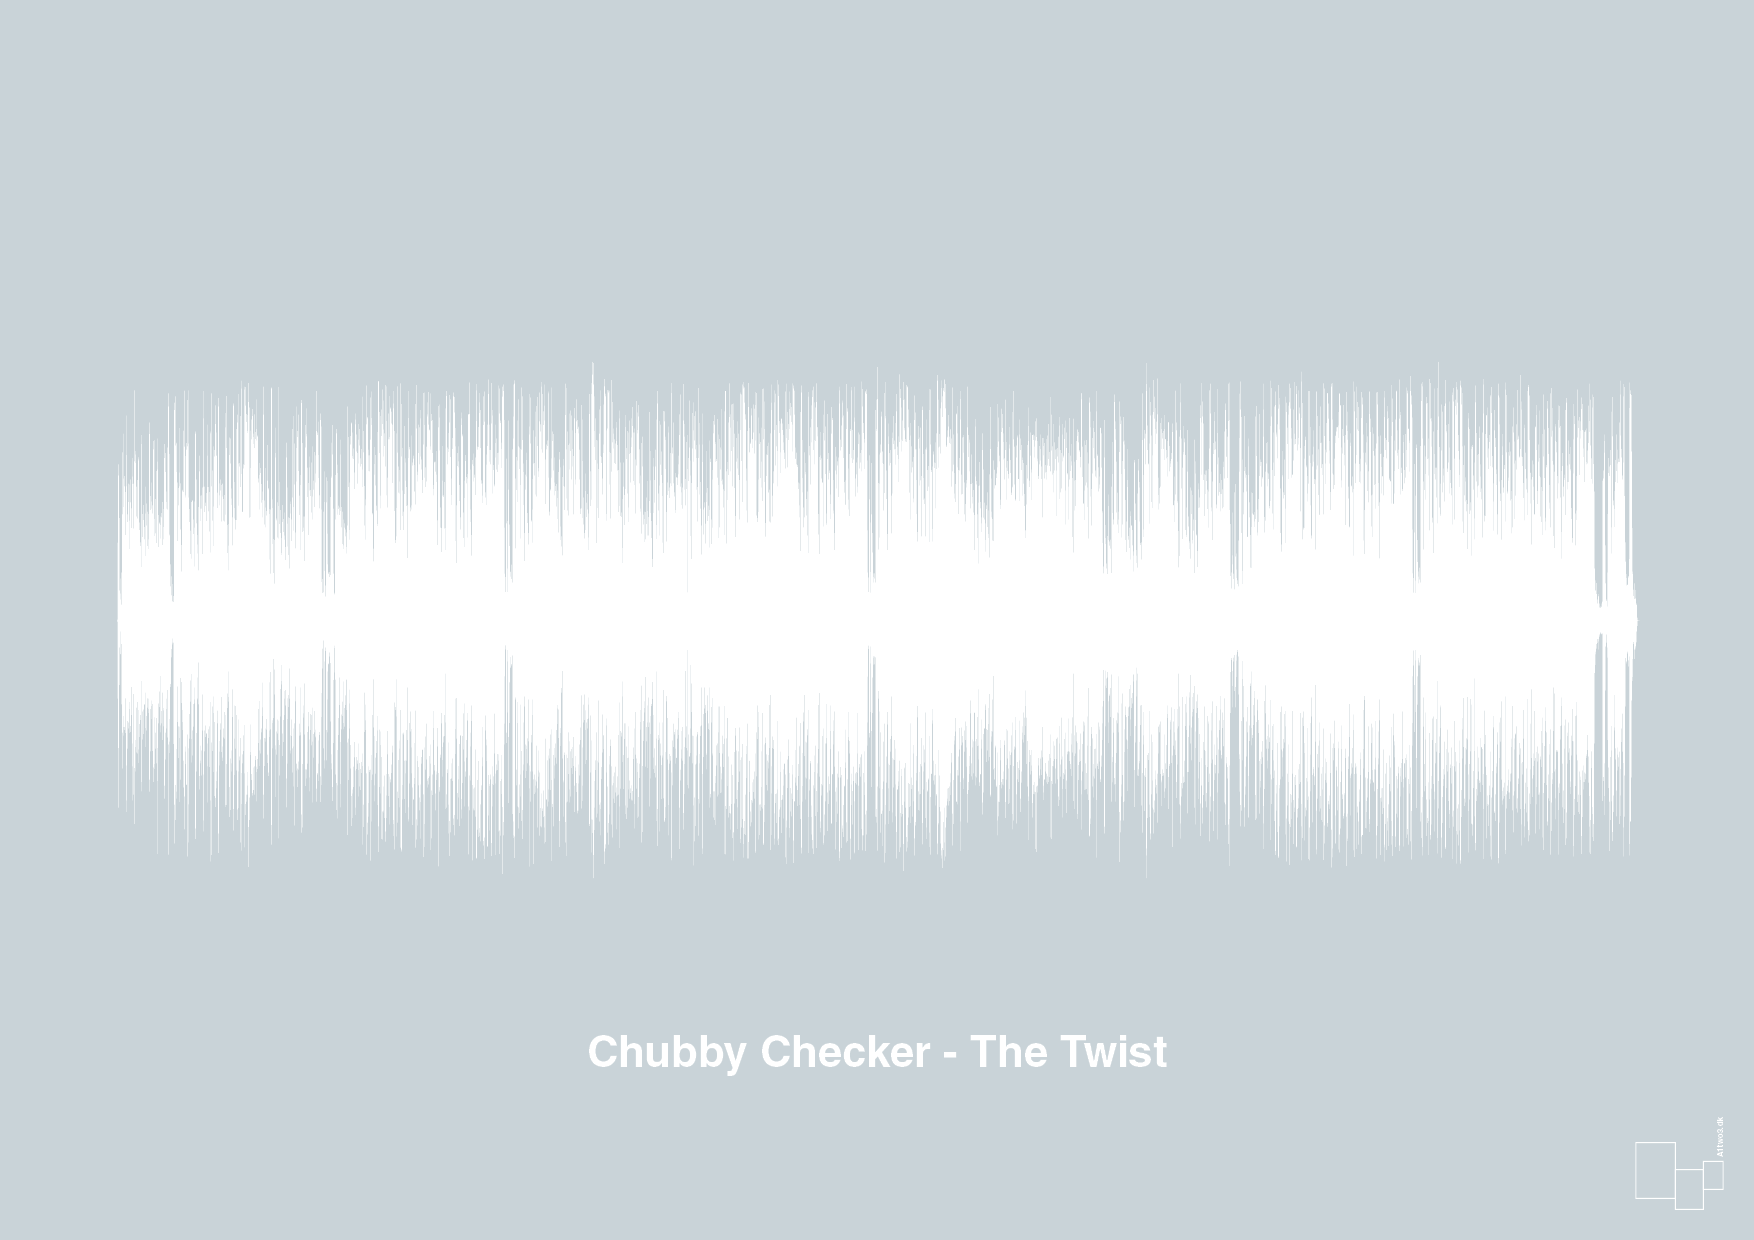 chubby checker - the twist - Plakat med Musik i Light Drizzle